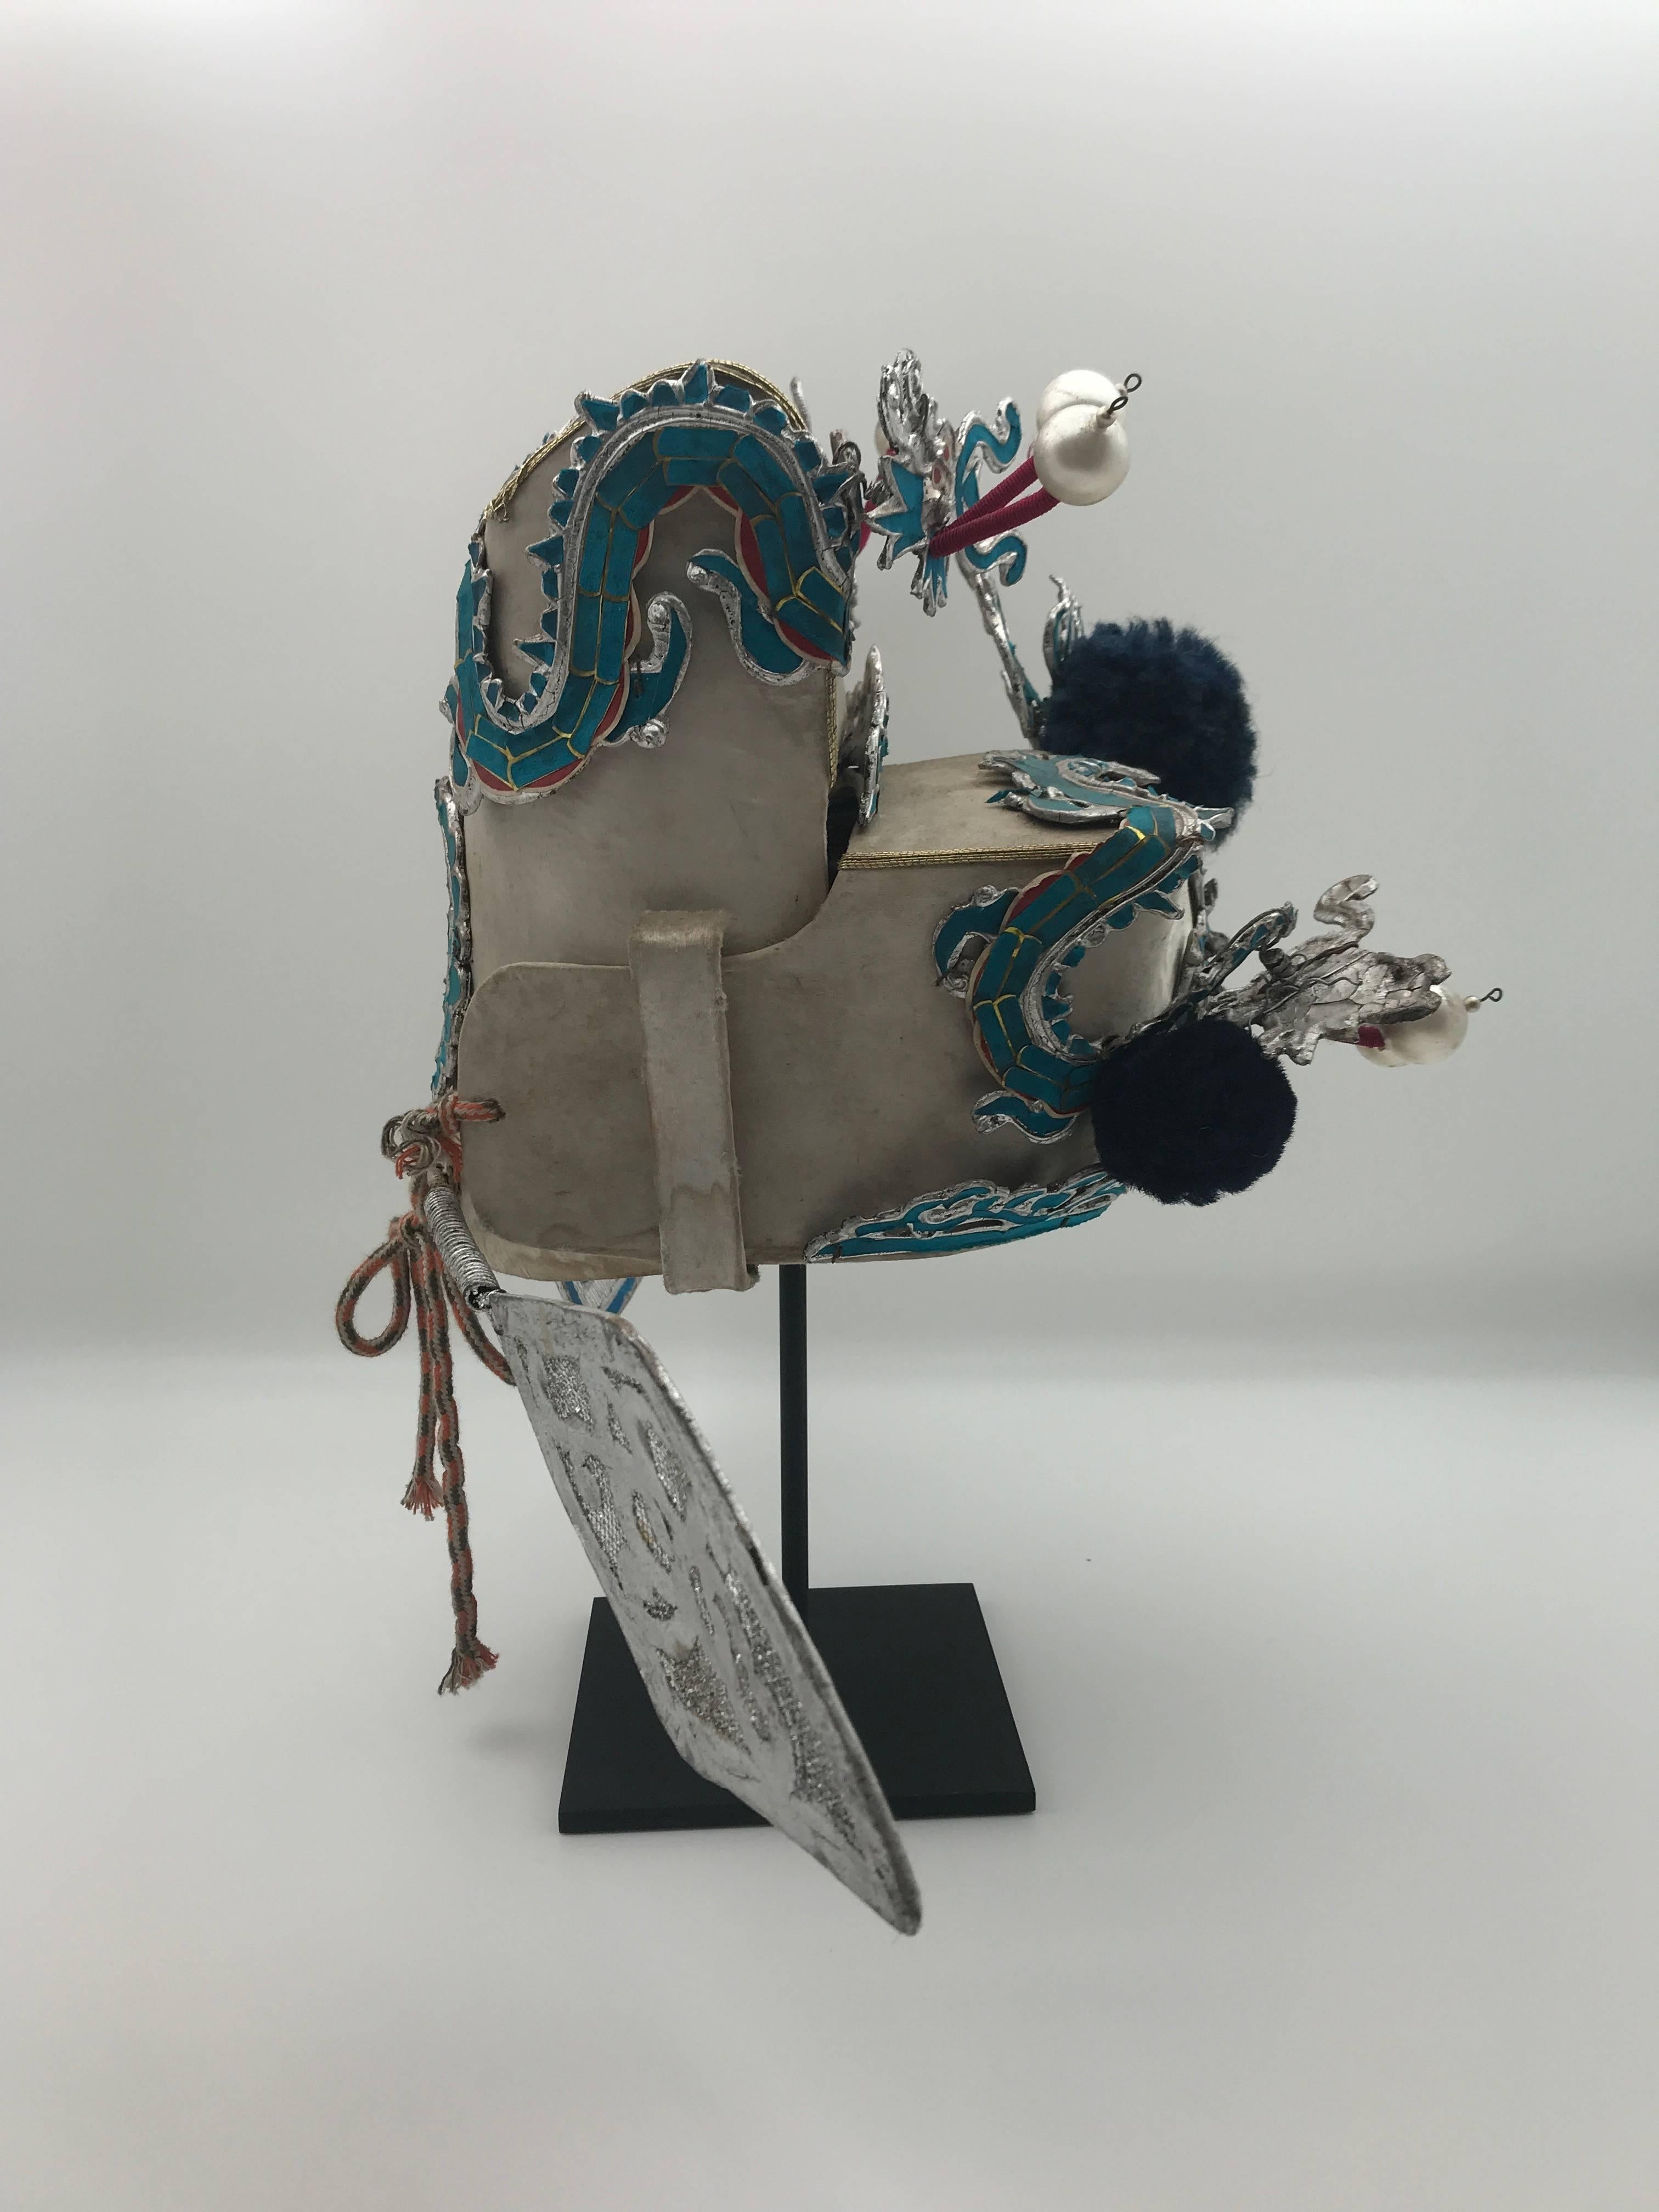 Metal Vintage Chinese Opera Theatre Headdress in Turquoise with Midnight Blue Pom Poms